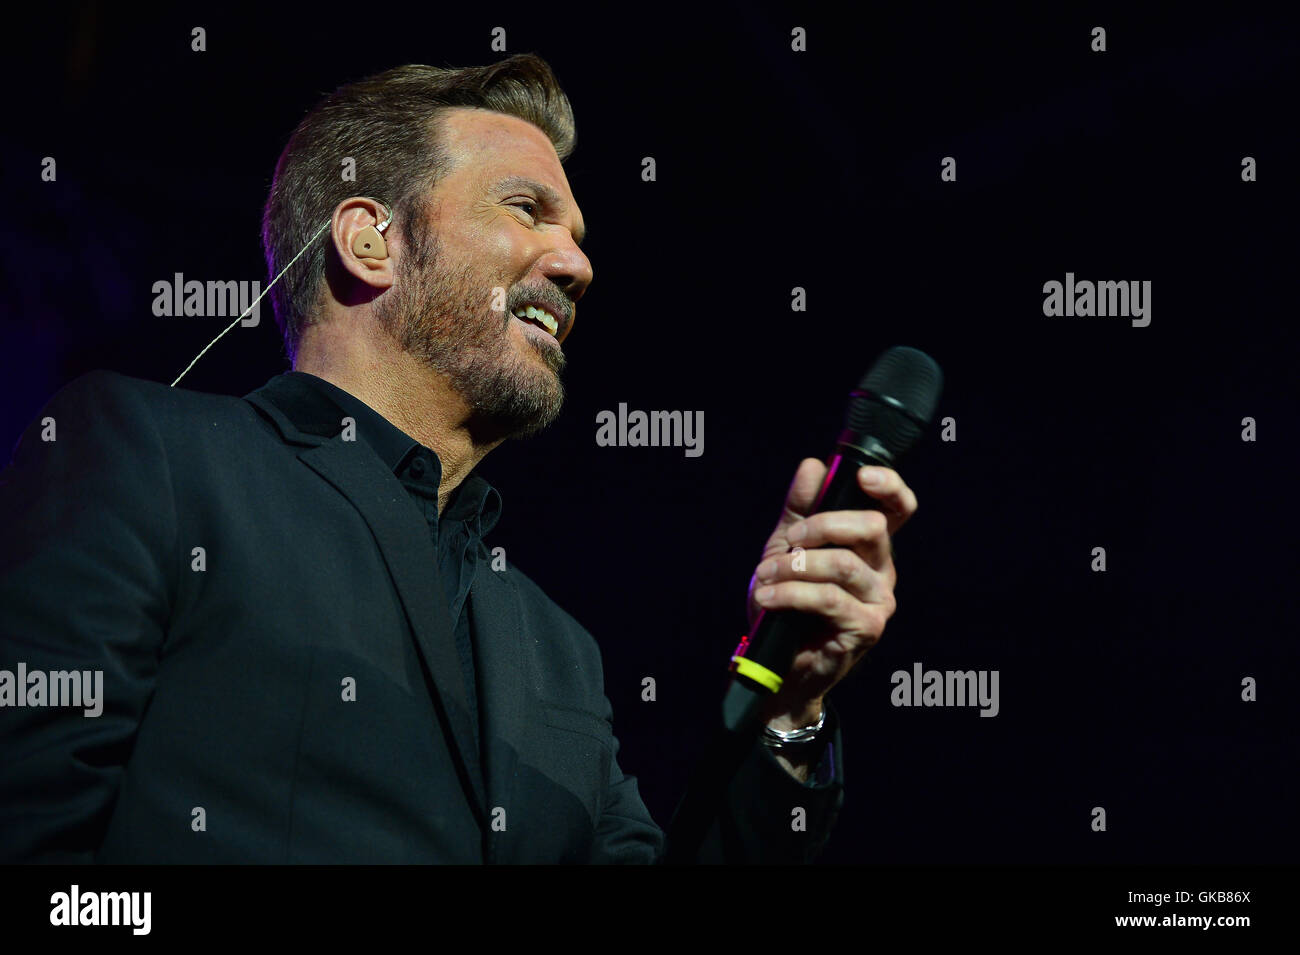 Aqui Estoy Benefit For Ecuador at BankUnited Center  Featuring: Willy Chirino Where: Coral Gables, Florida, United States When: 11 May 2016 Stock Photo